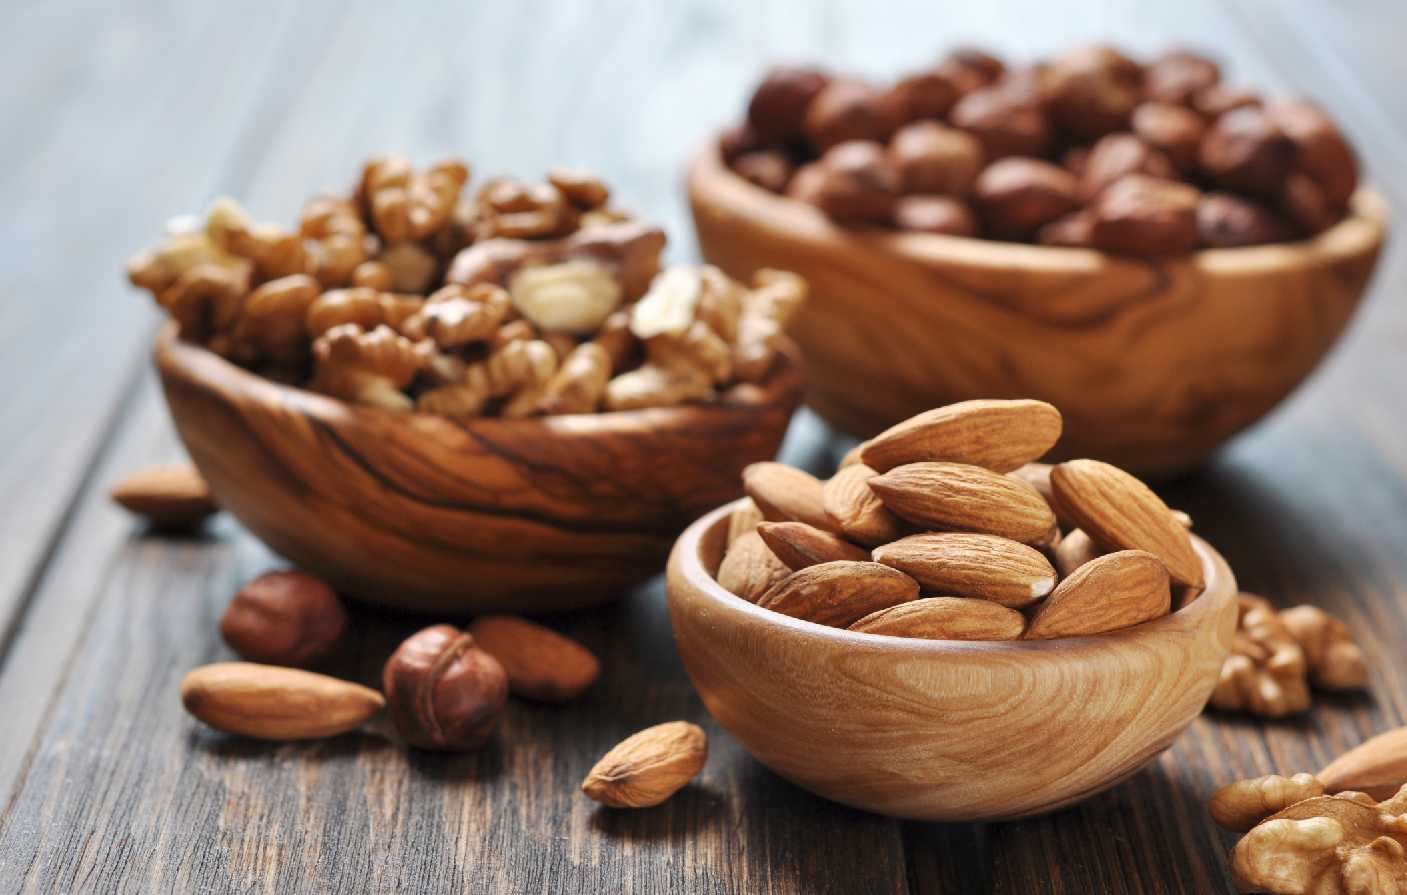 Top 5 Healthiest Nuts | Crunchy Snacking Options